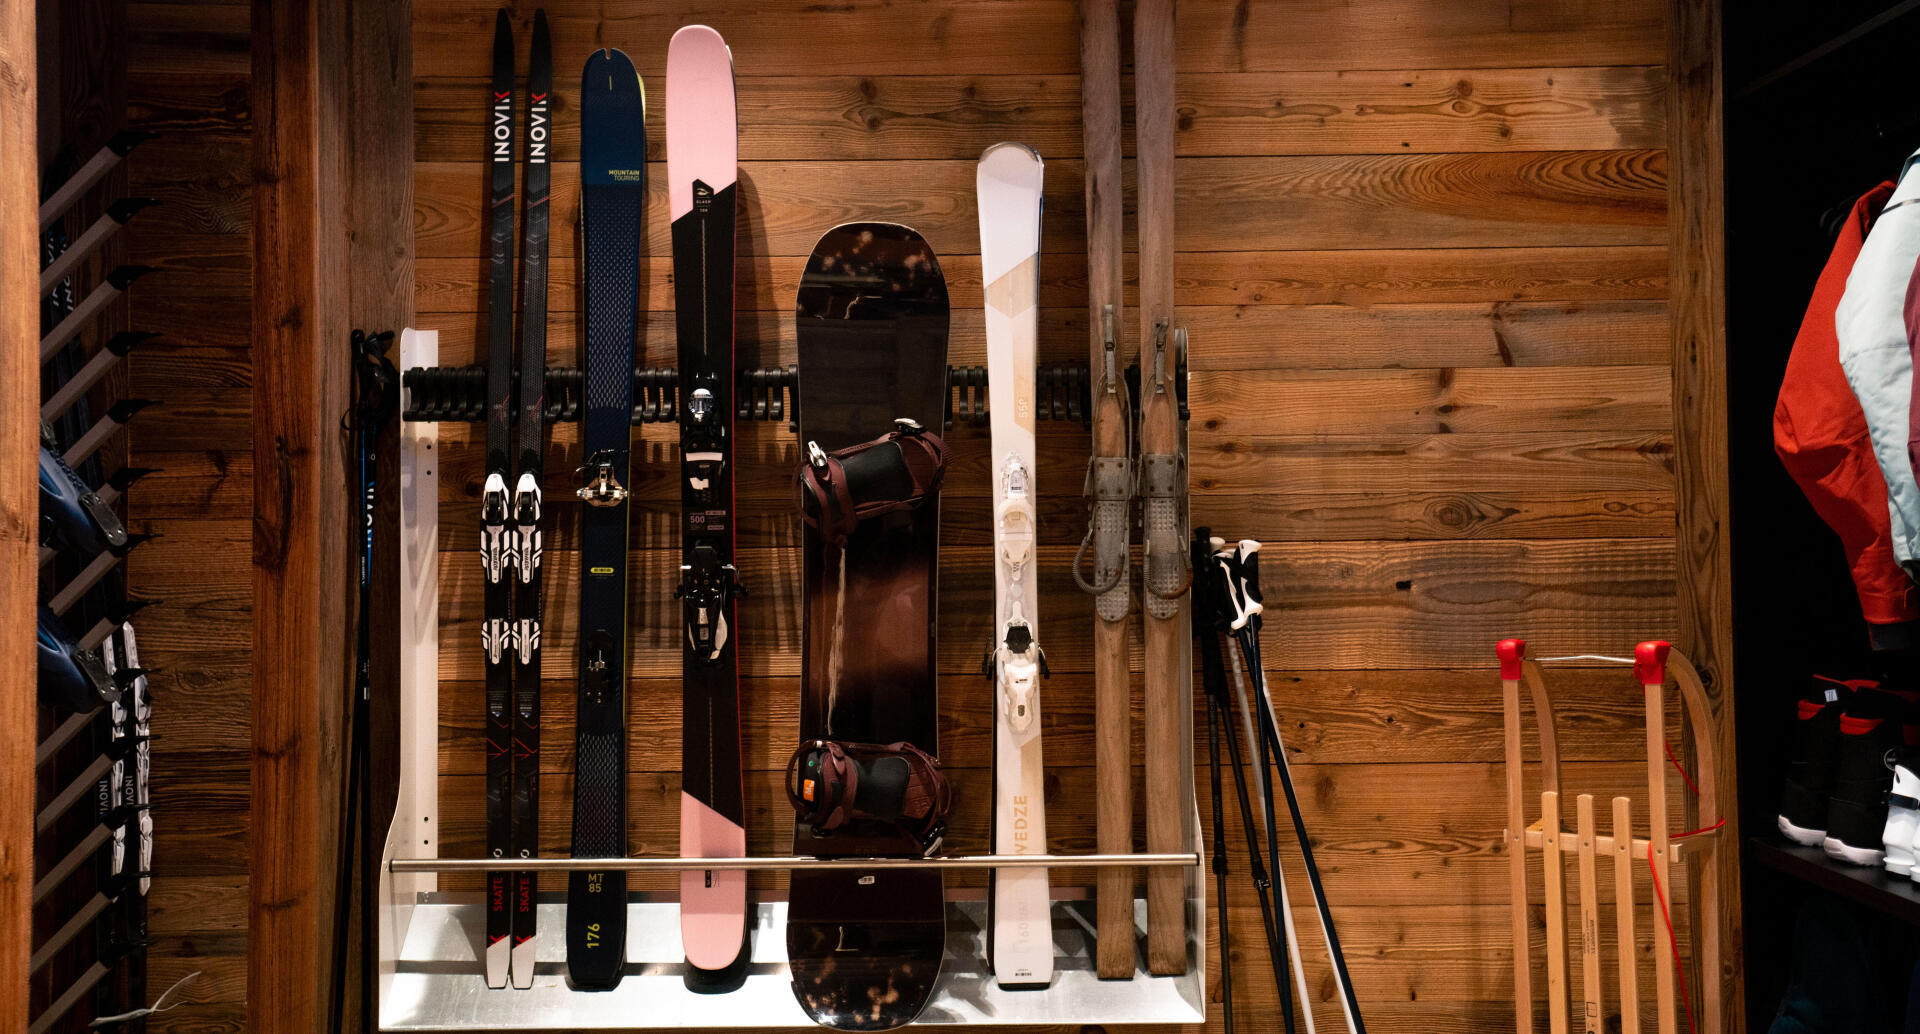 Why wax your skis at the end of the season?